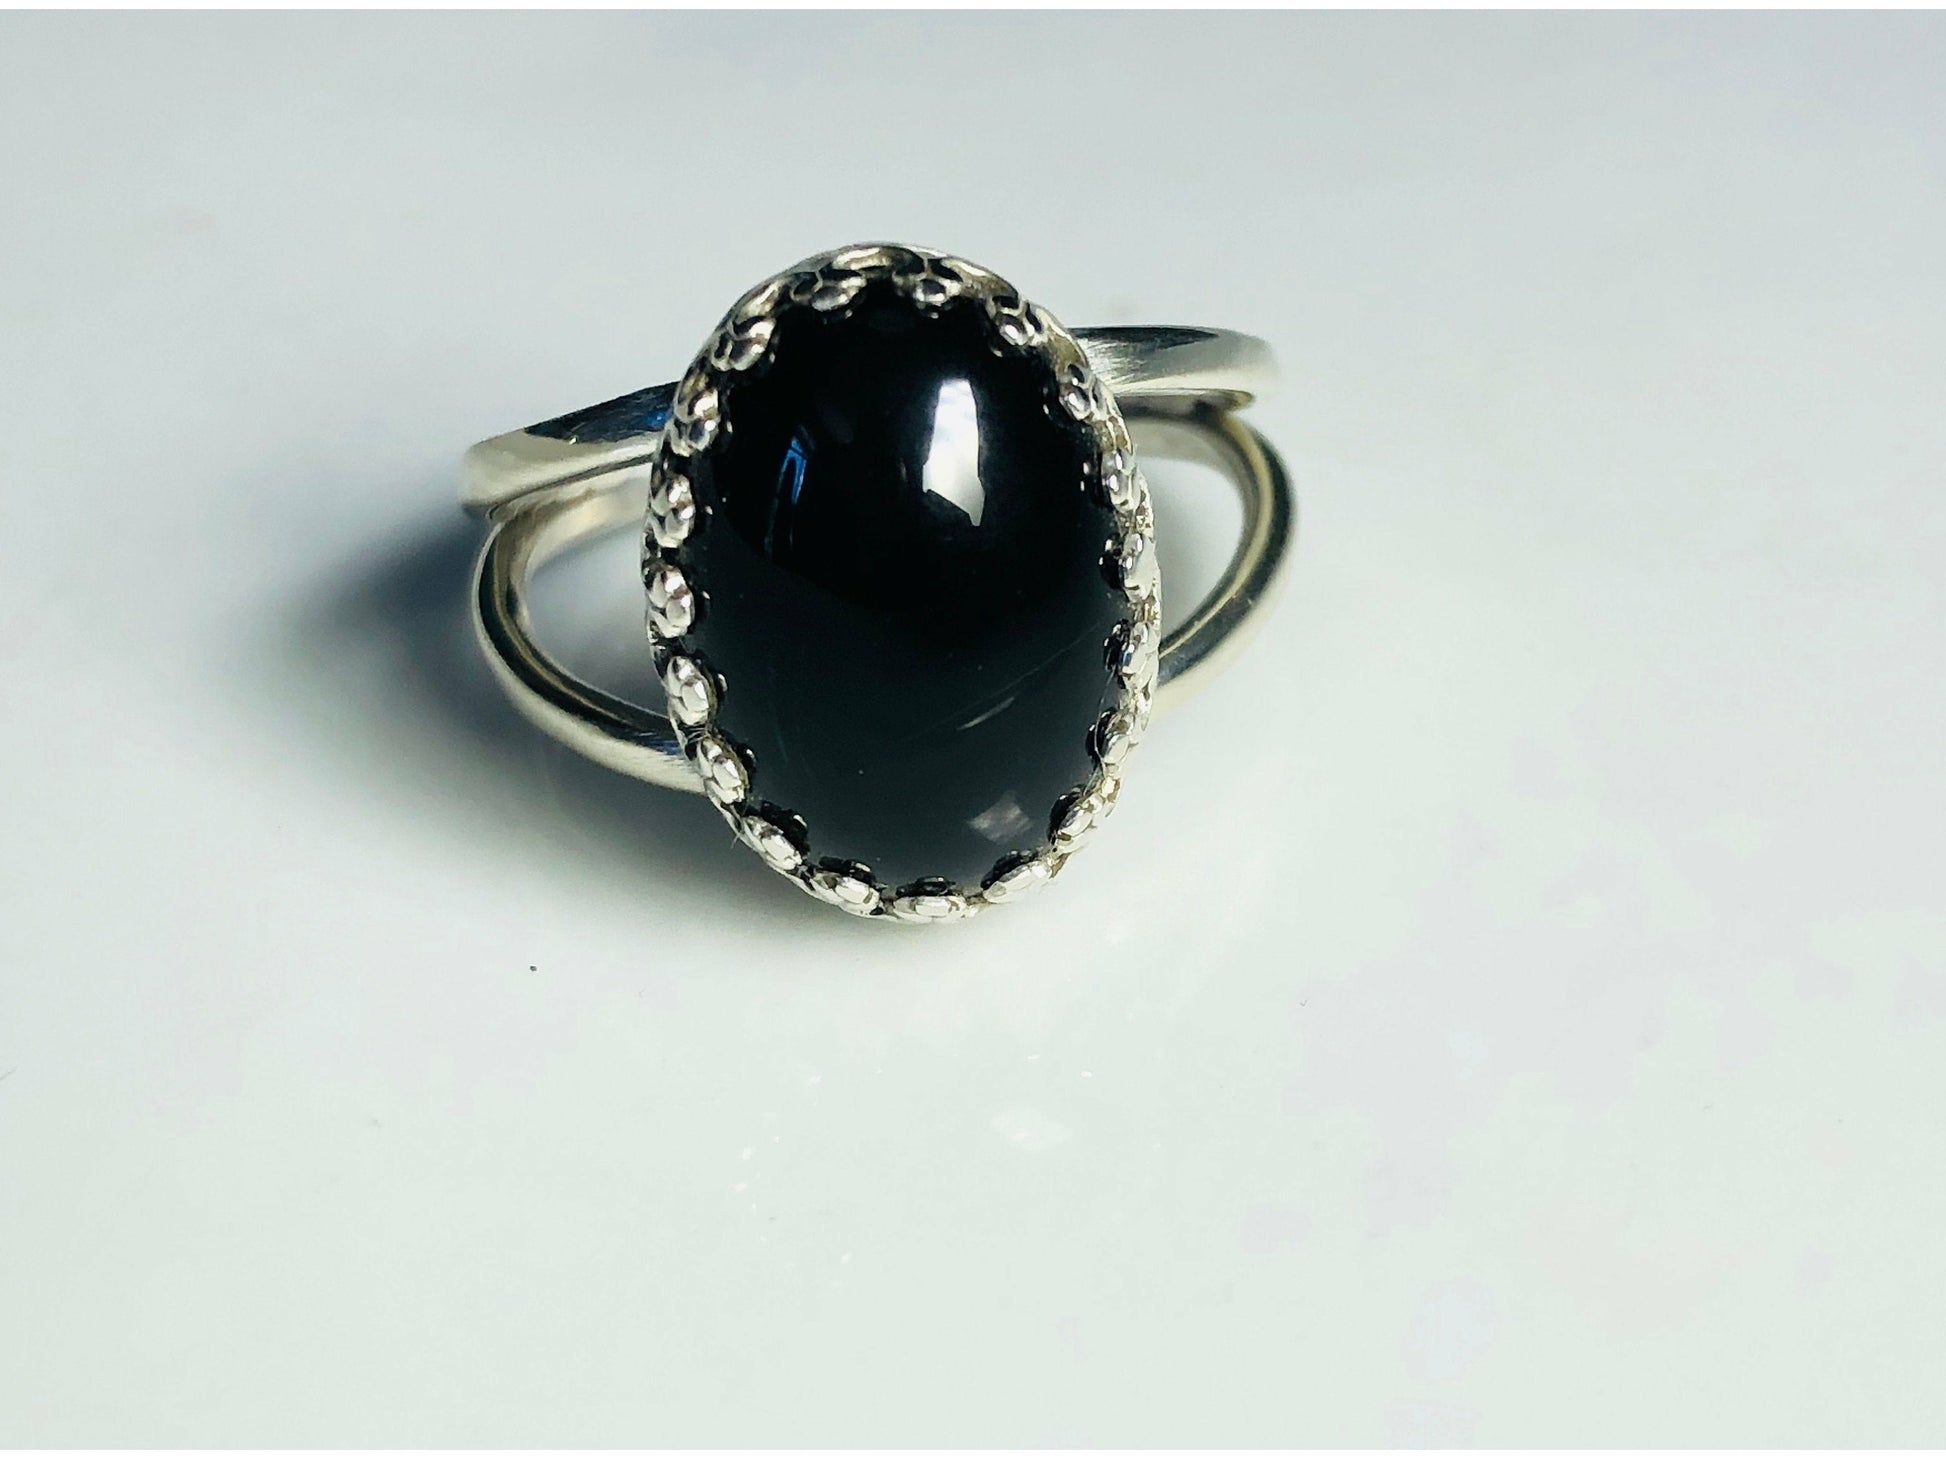 black-onyx-ring-sterling-silver-ring-ring-for-woman-gift-for-her-black-sterling-silver-ring-gift-gemstone-jewelry-gemstone-ring